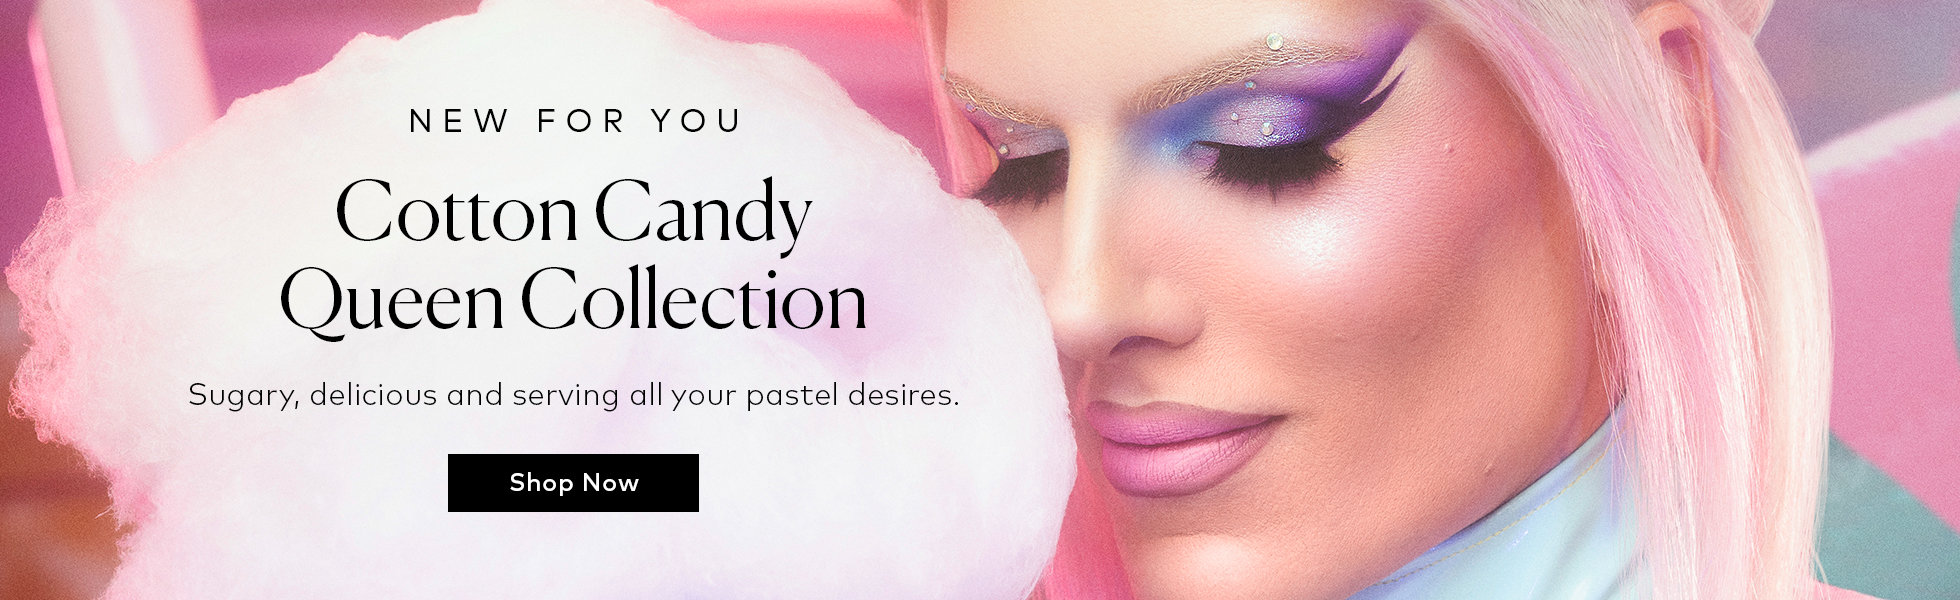 Shop the Jeffree Star Cosmetics Cotton Candy Queen Collection at Beautylish.com